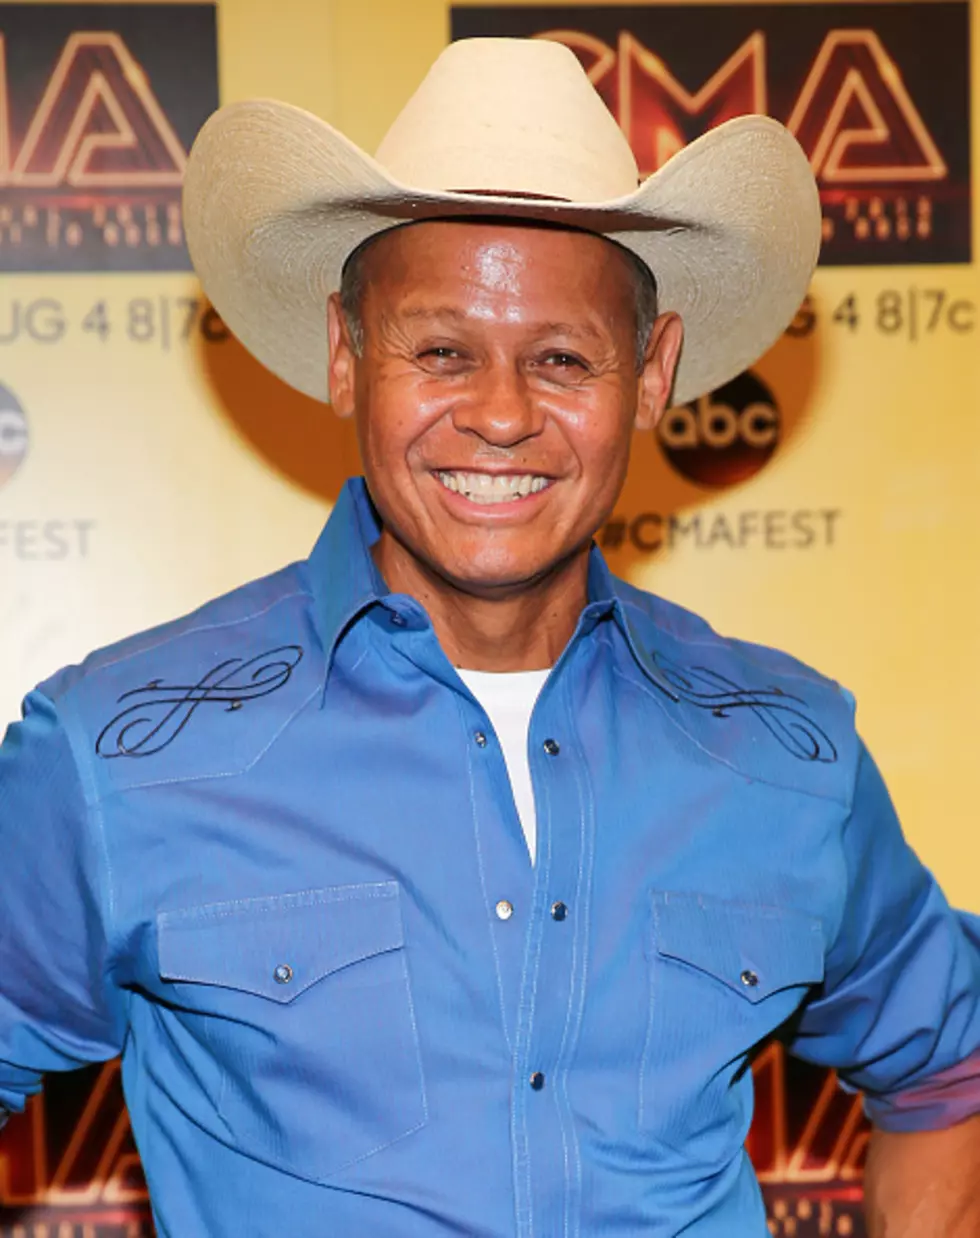 Save 50 Percent on Tickets to the Homesteader Days Concert Featuring Neal McCoy